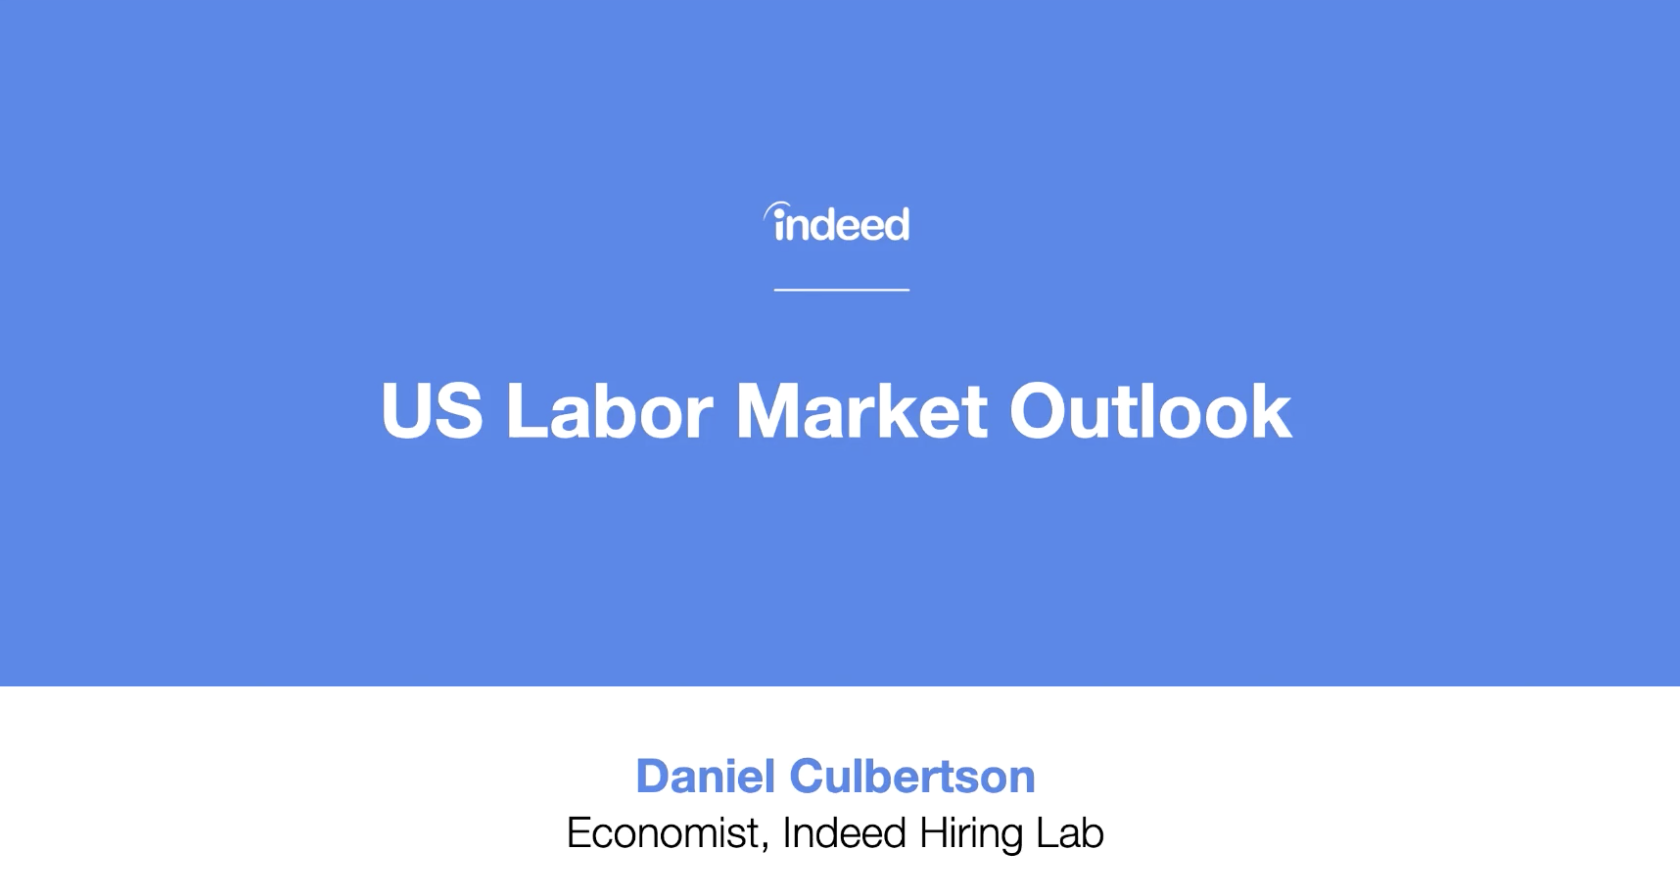 January 2021 US labor market update from Indeed